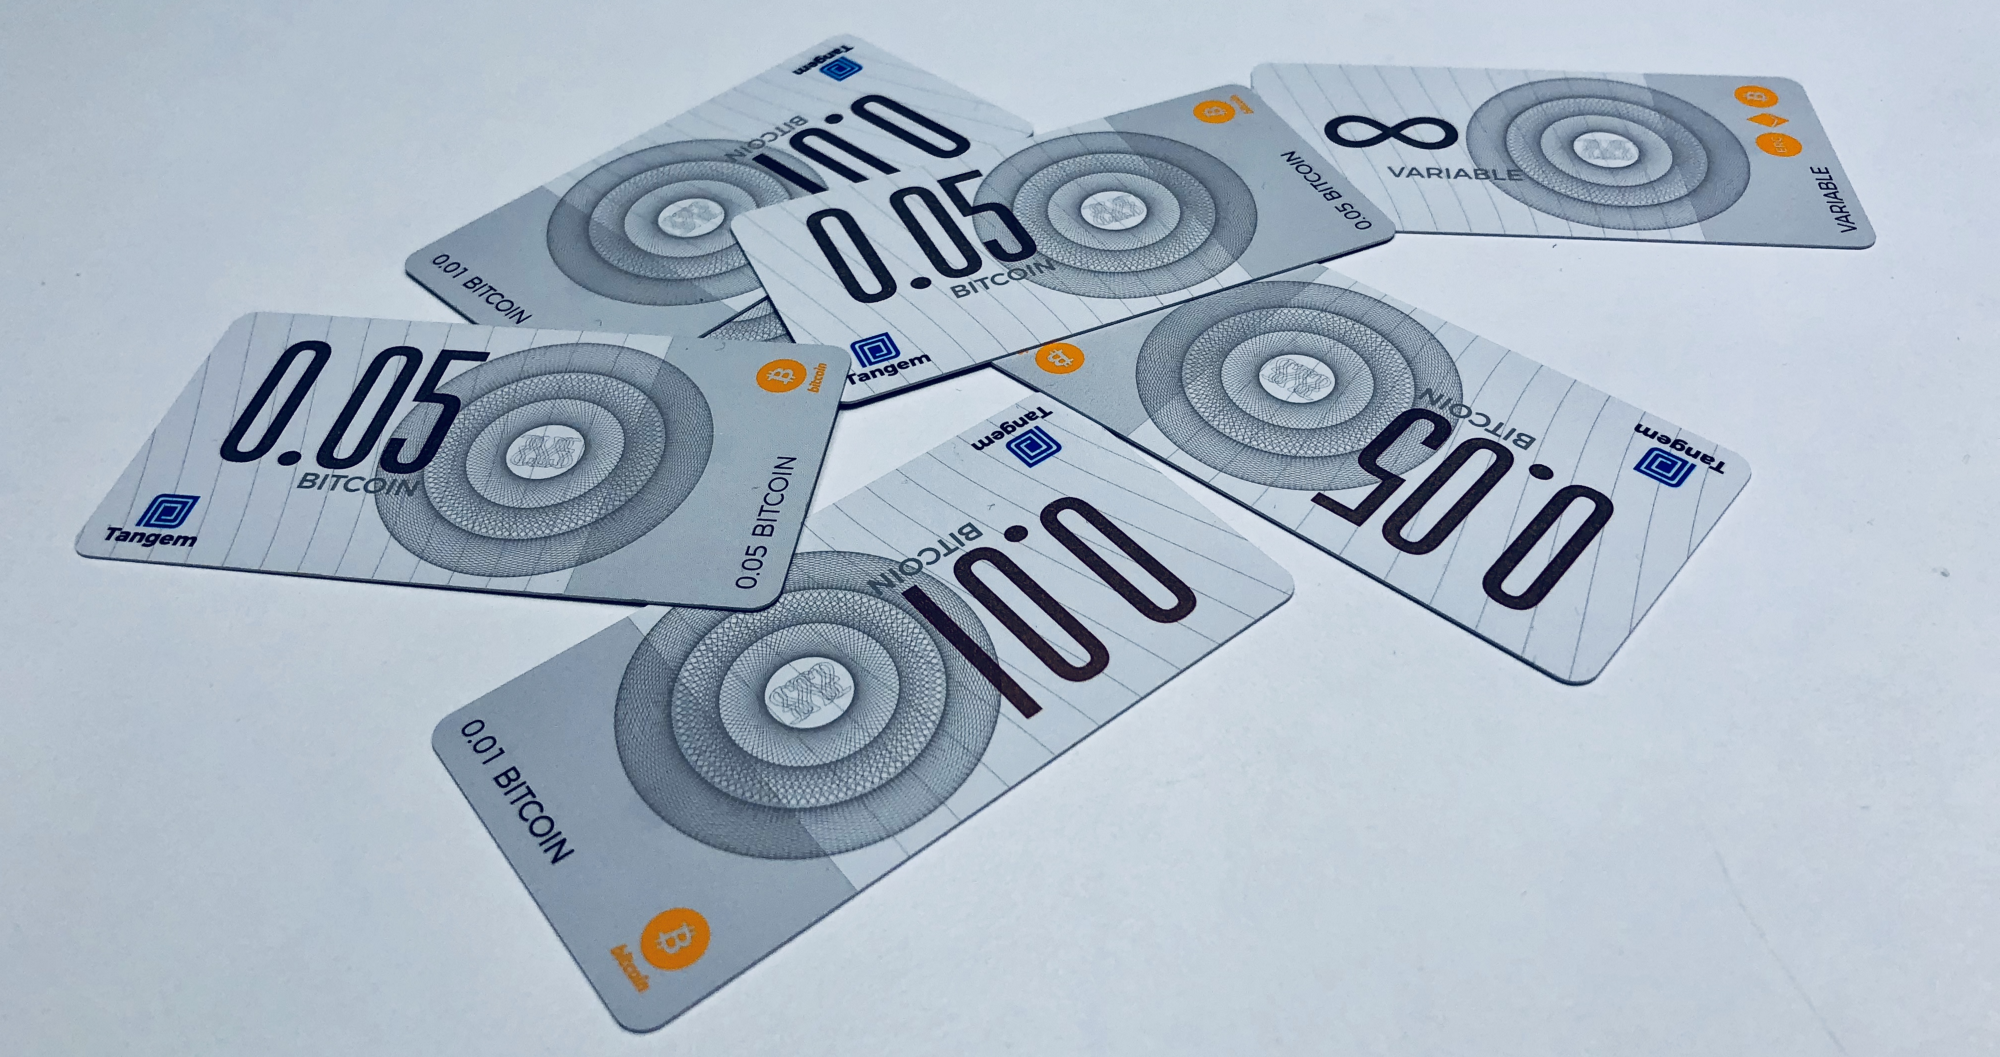 Clever banknotes from Tangem will make crypto currency massive